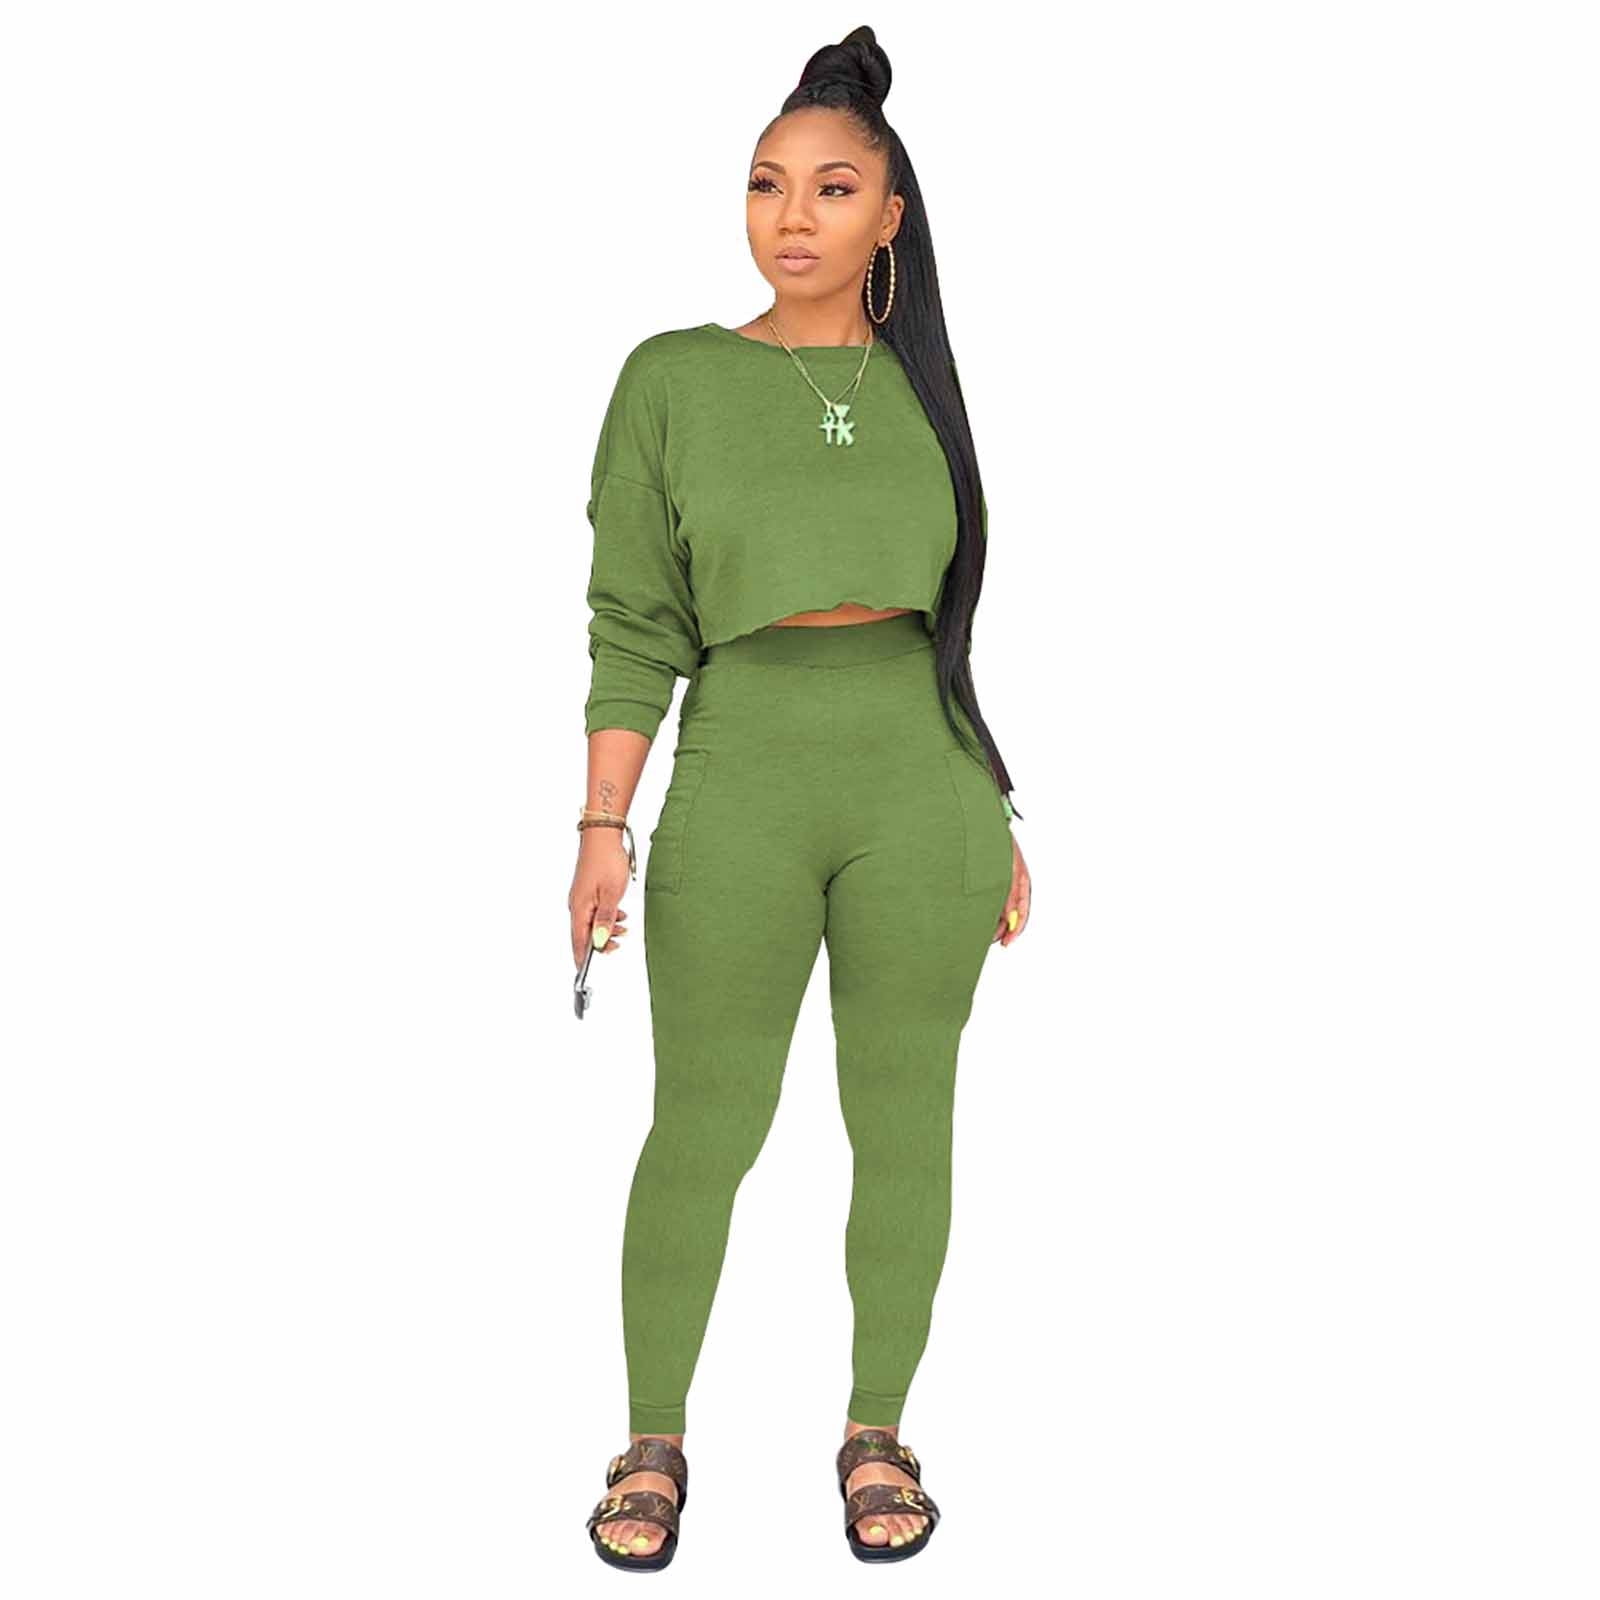 Herrnalise Women's two-piece solid color clothing Women's Fashion Full  Sleeve Sweater Pocket Pants Two-Piece Set 